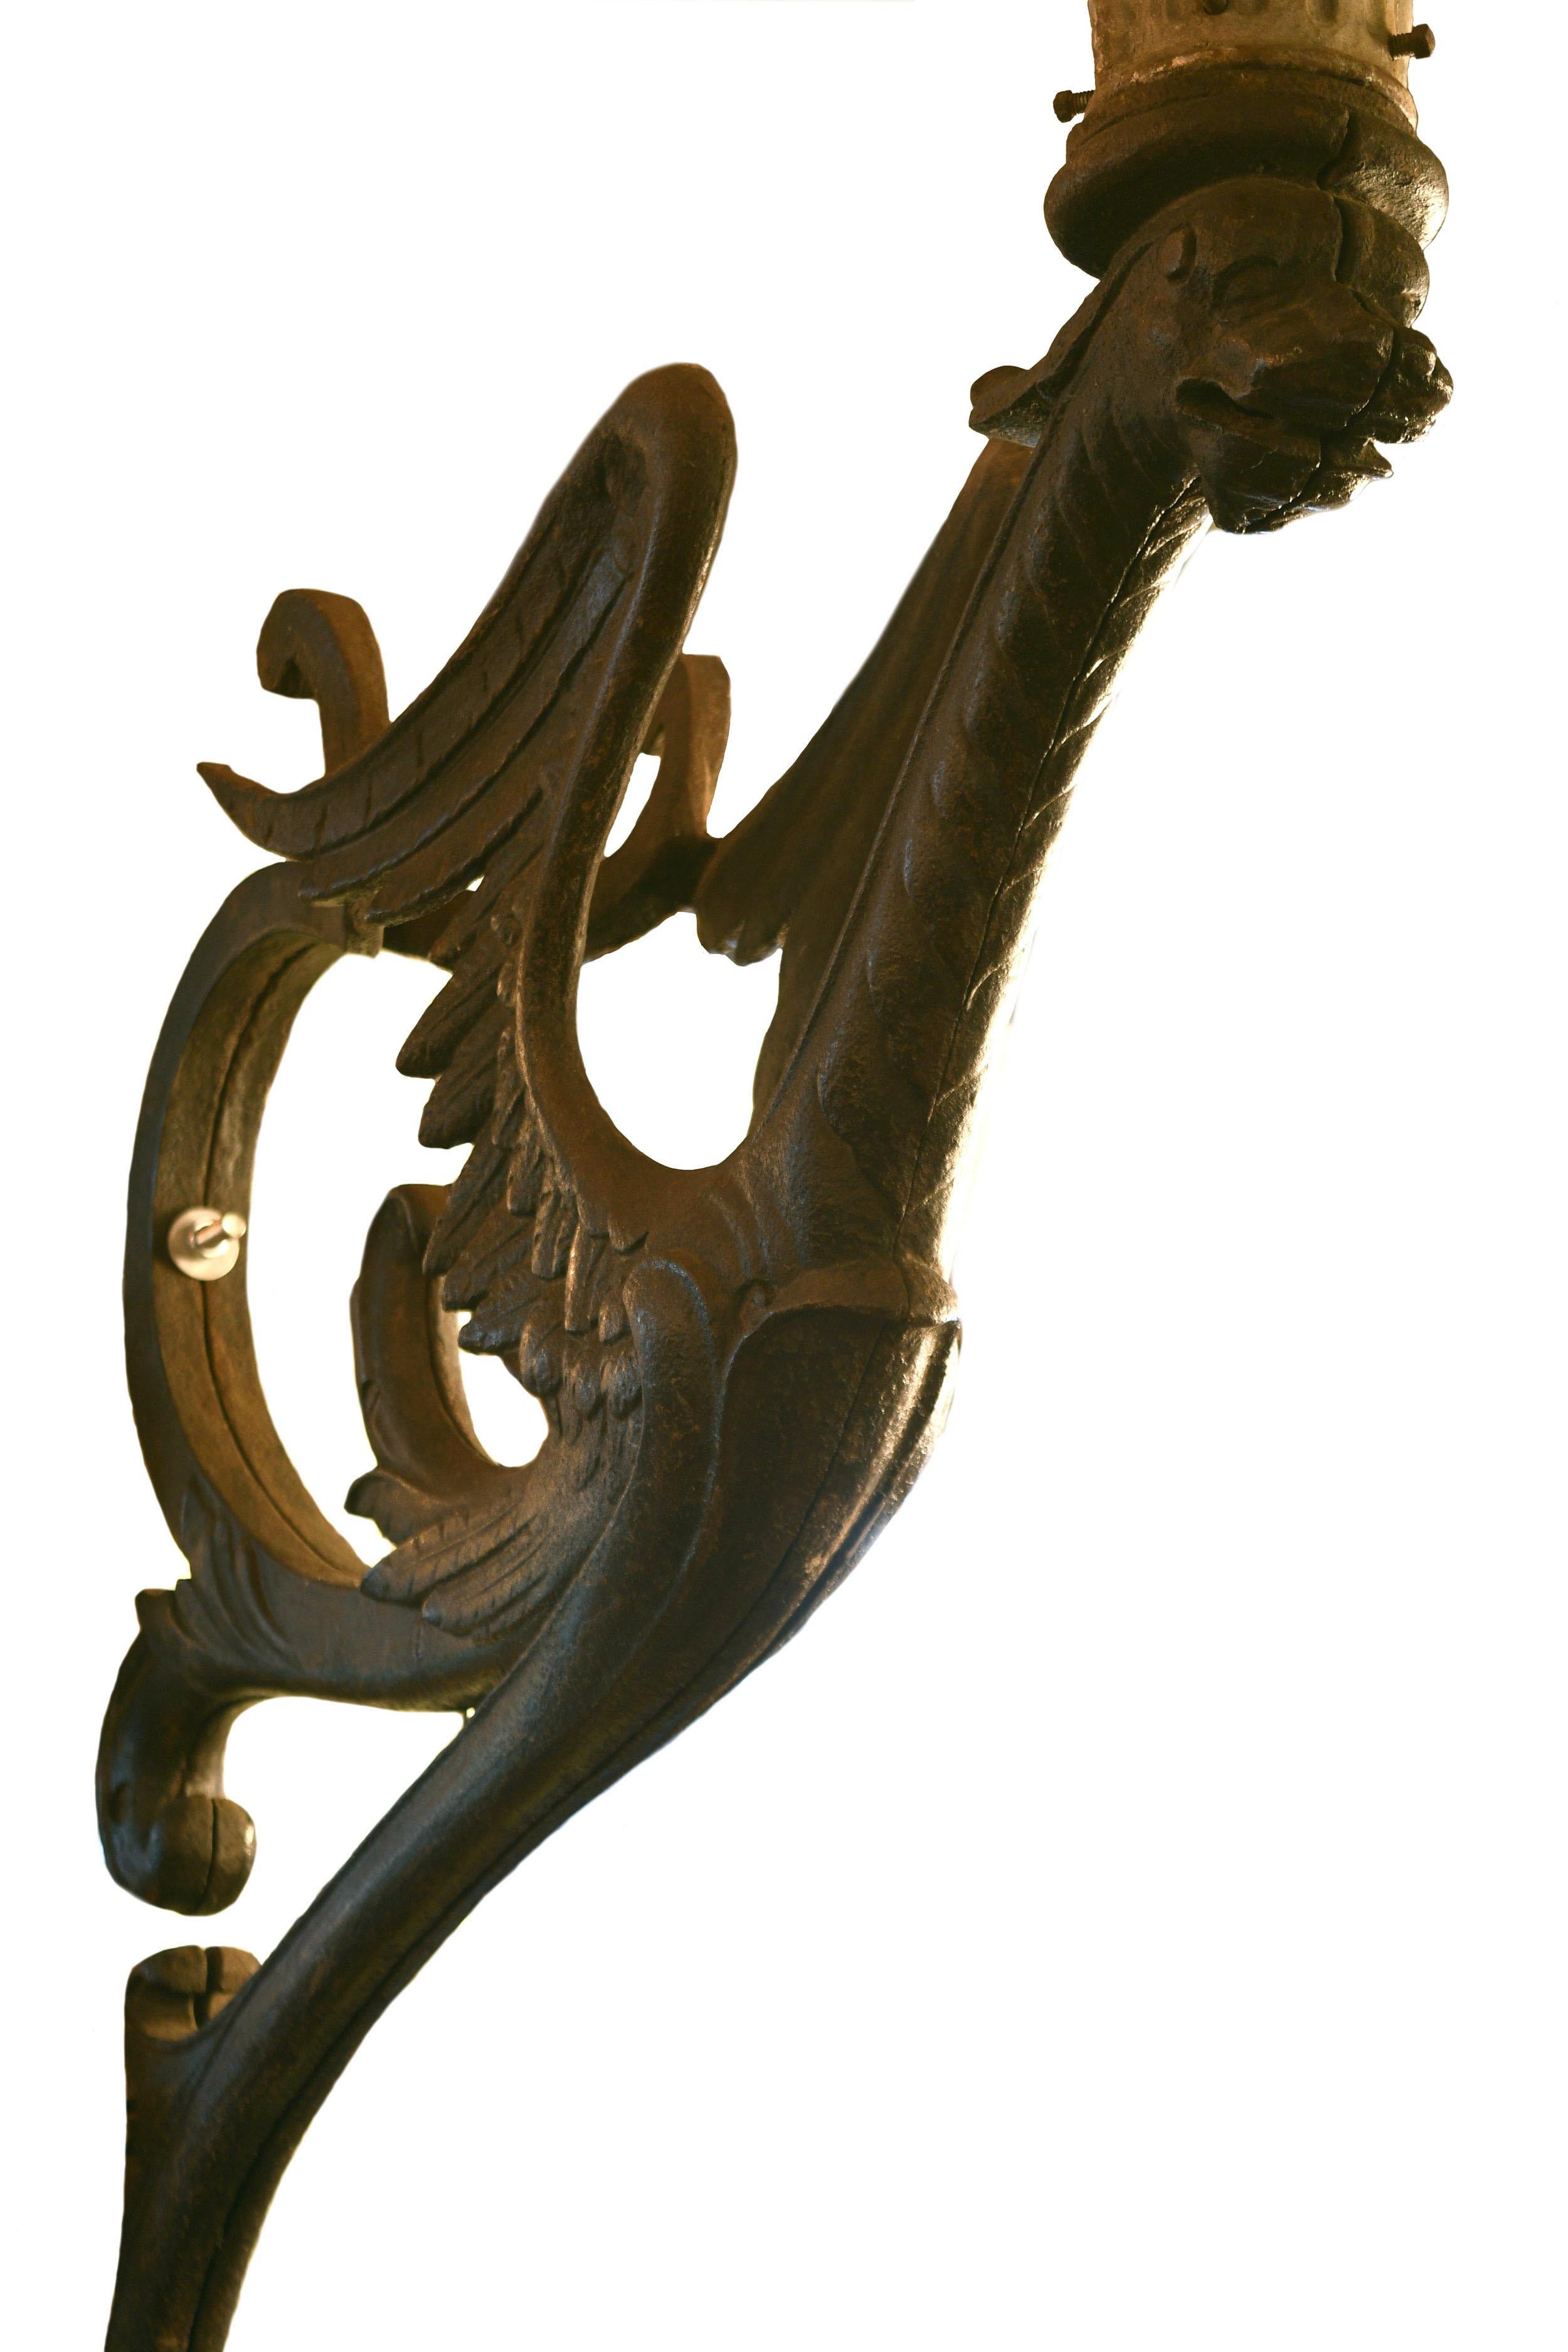 This massive cast iron winged dragon sconce was once used to illuminate the St. Louis World's Fair of 1904. An oversized and luminous cylindrical lamp rests above the dragon’s head. The dragon’s body features intricately detailed wings and a long